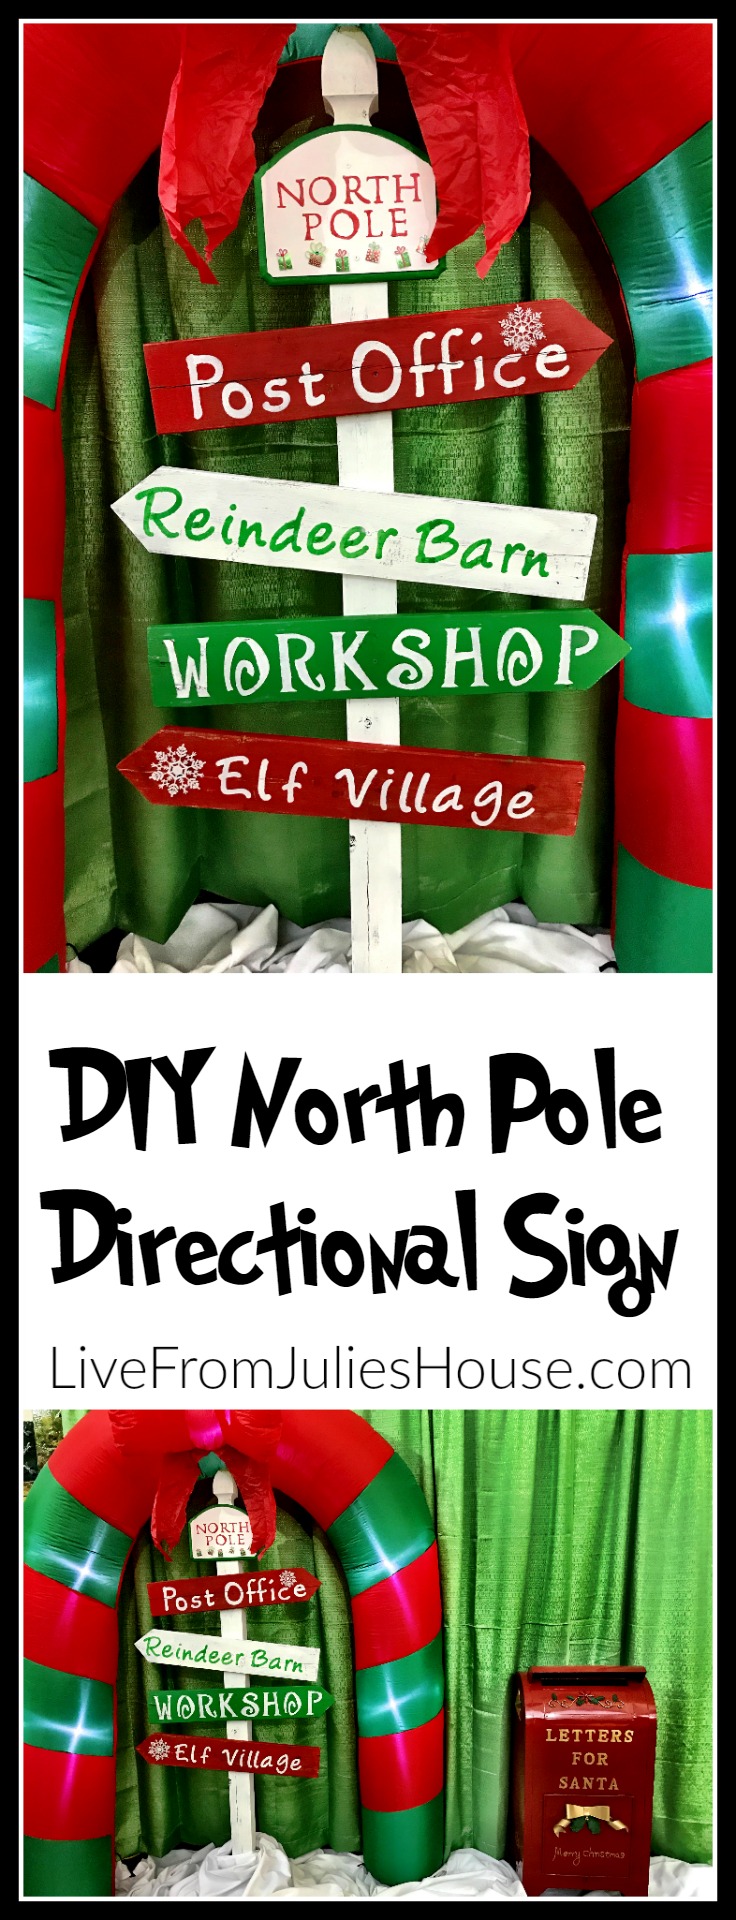 DIY North Pole Directional Sign